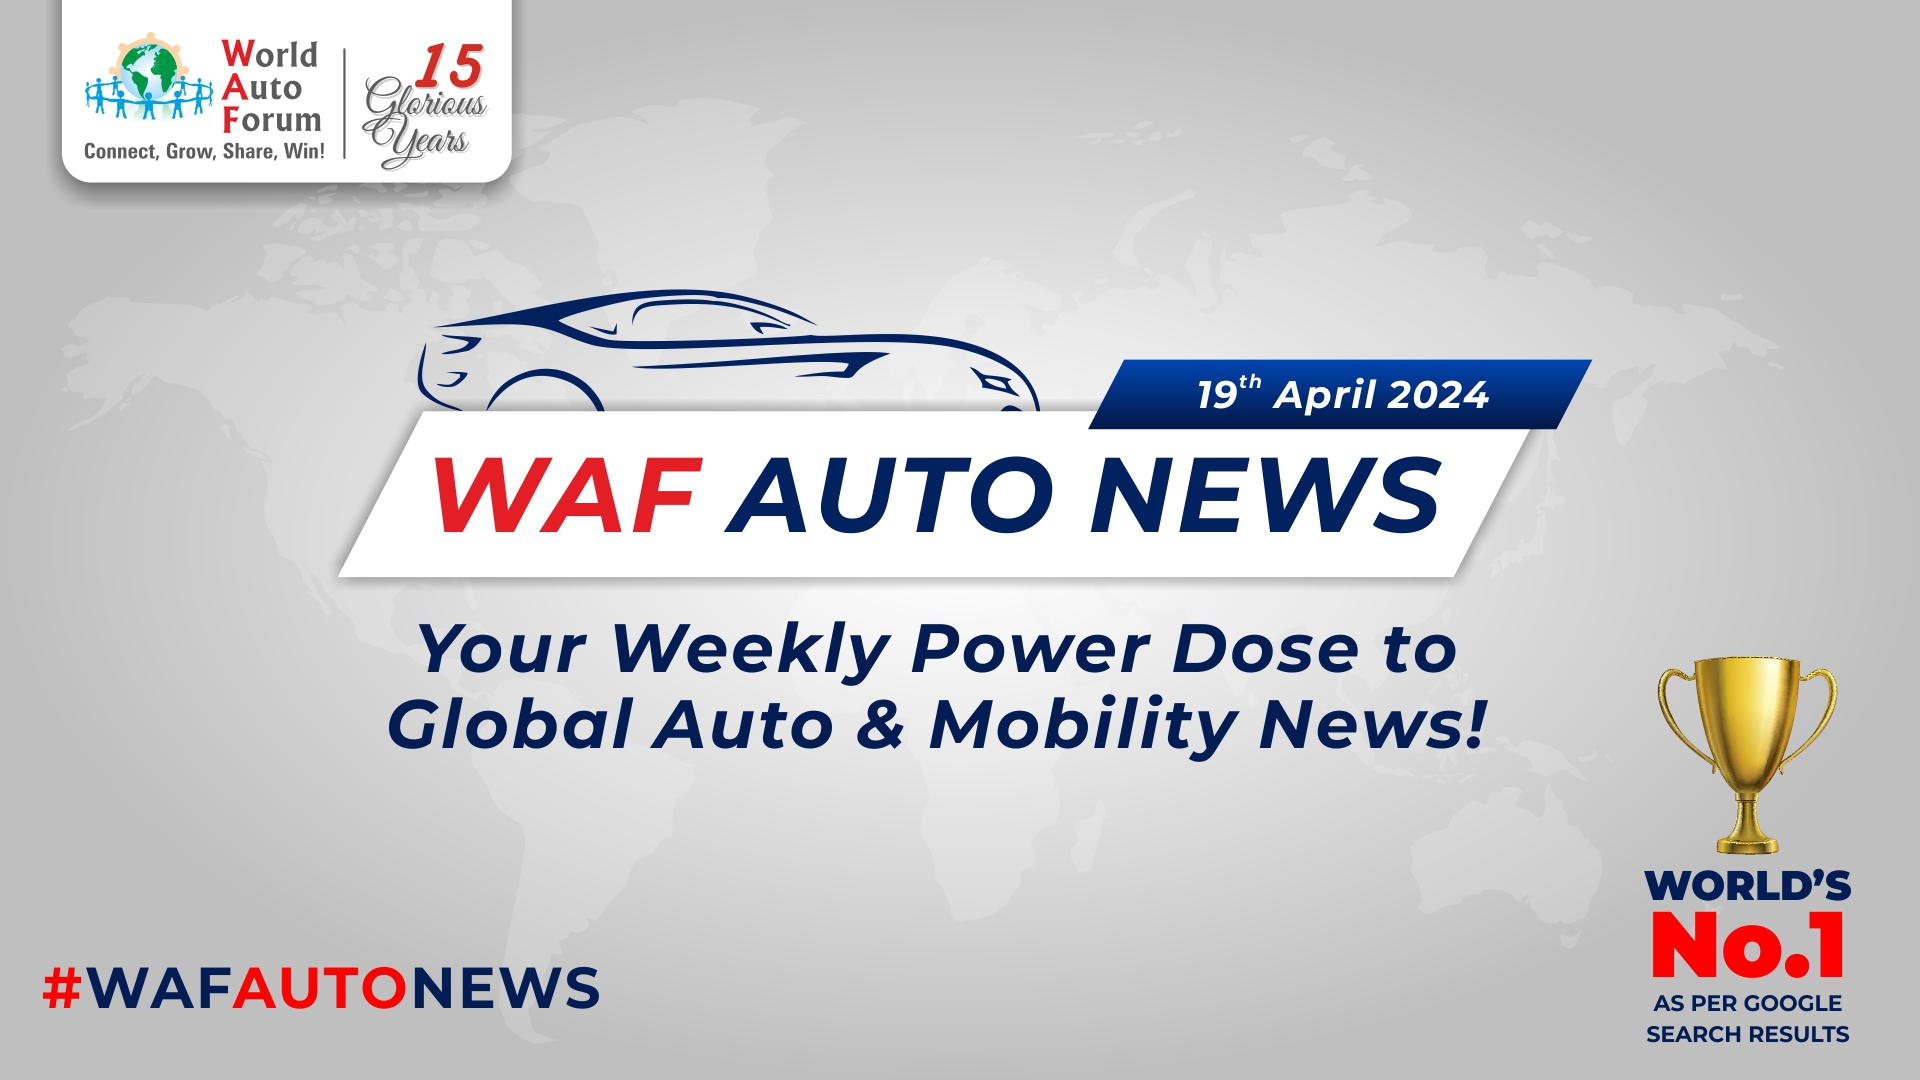 WAF Auto News | The Auto World This Week (19th April 2024) | World Auto Forum